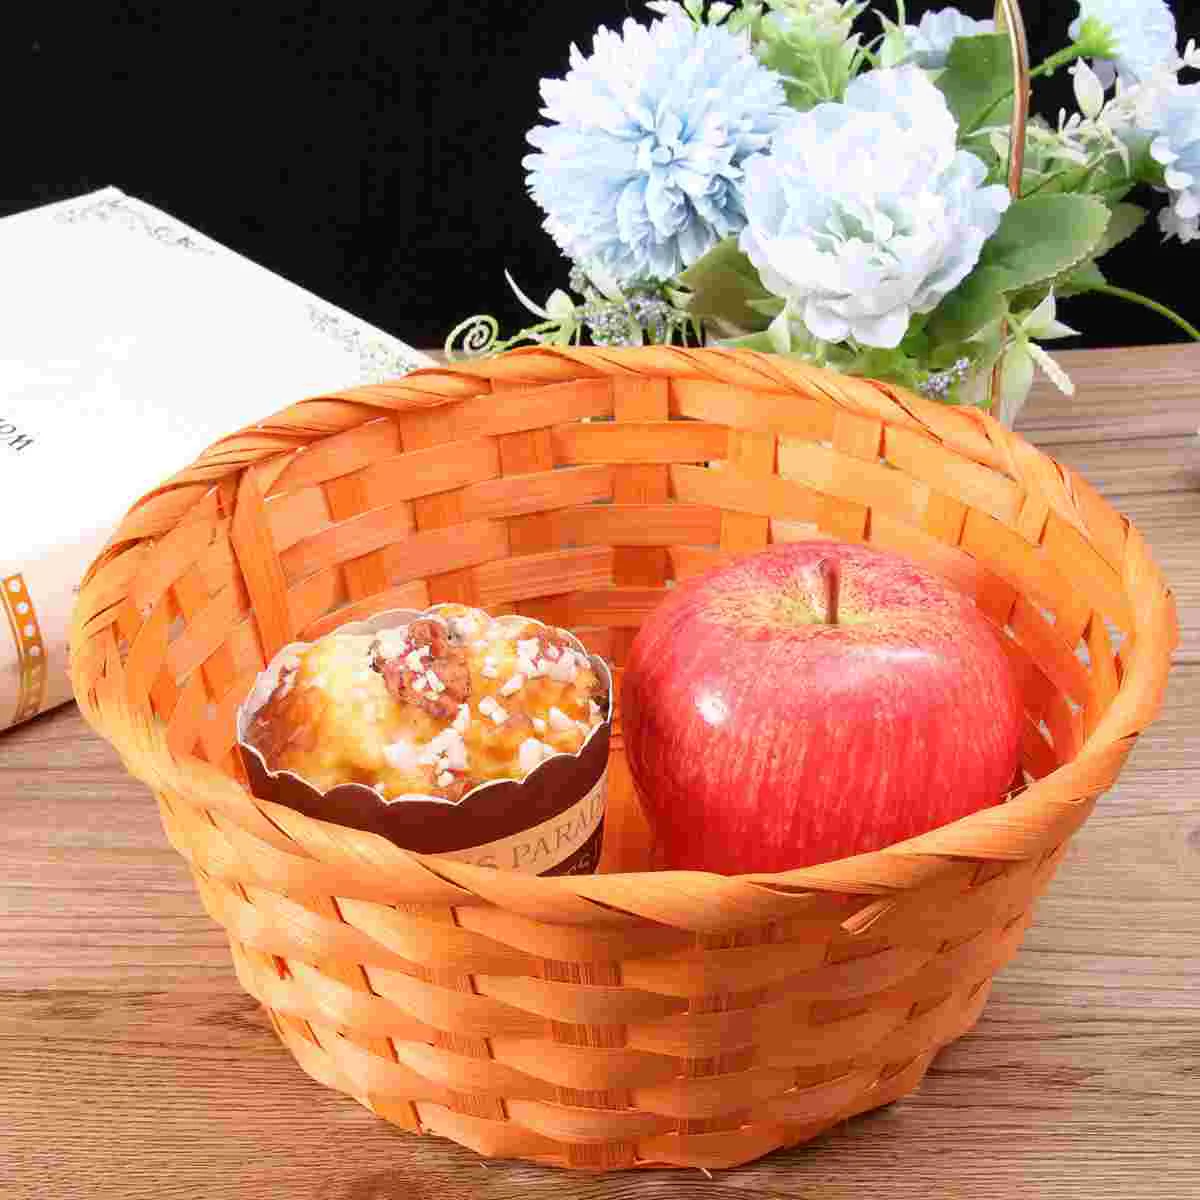 

Basket Woven Baskets Storage Easter Round Bamboo Wicker Picnic Bread Decorative Fruit Natural Egg Serving Eggs Candy Props